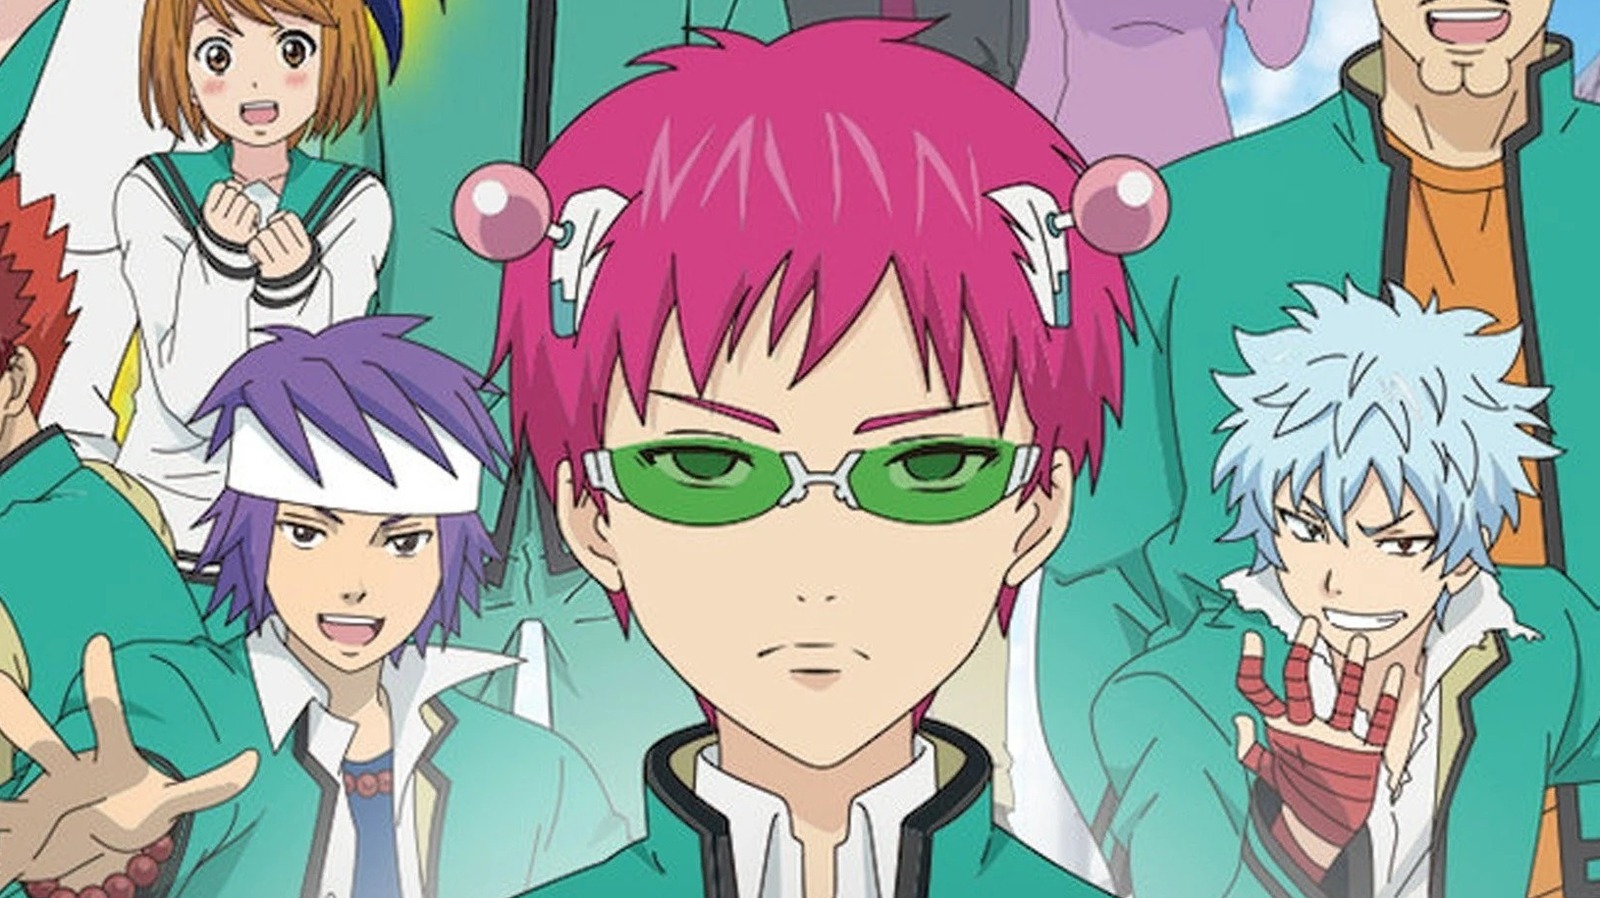 Riapawel The Disastrous Life of Saiki K. Poster 12X16 Inch Cartoon  Characters Paper Poster Home Decor Art Poster Anime Fans Gifts - Walmart.com